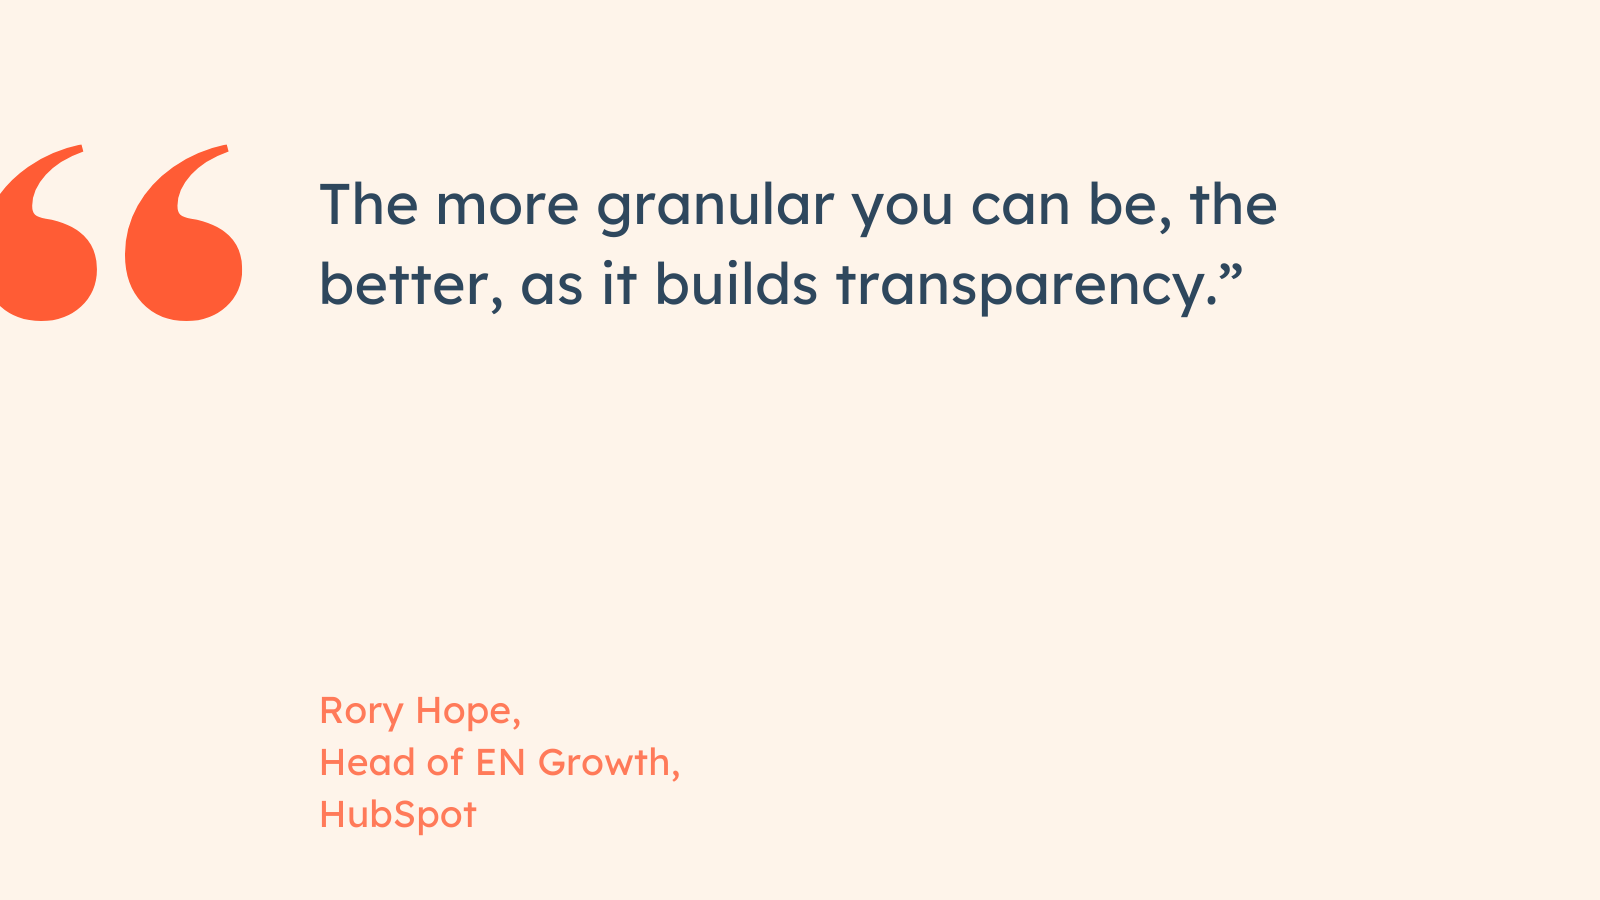 “The more granular you can be, the better, as it builds transparency.” Rory Hope, Head of EN Growth, HubSpot